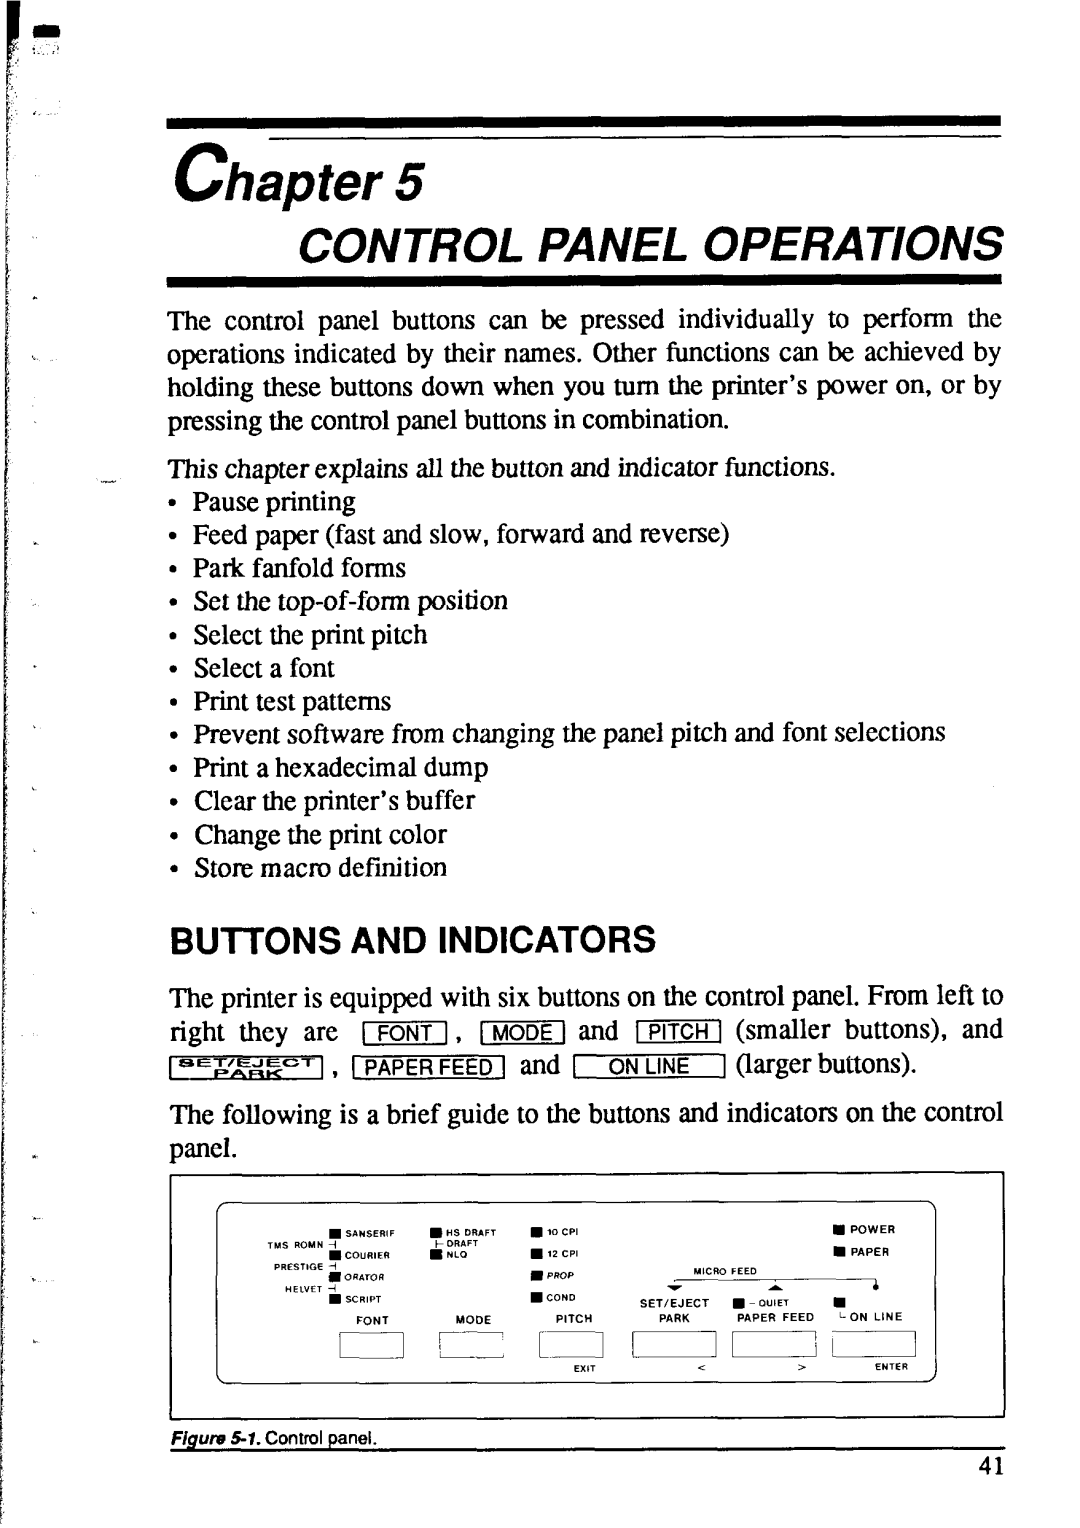 Star Micronics XR-1520, XR-1020 manual Chapter, Control Panel Operations, Buttons And Indicators 